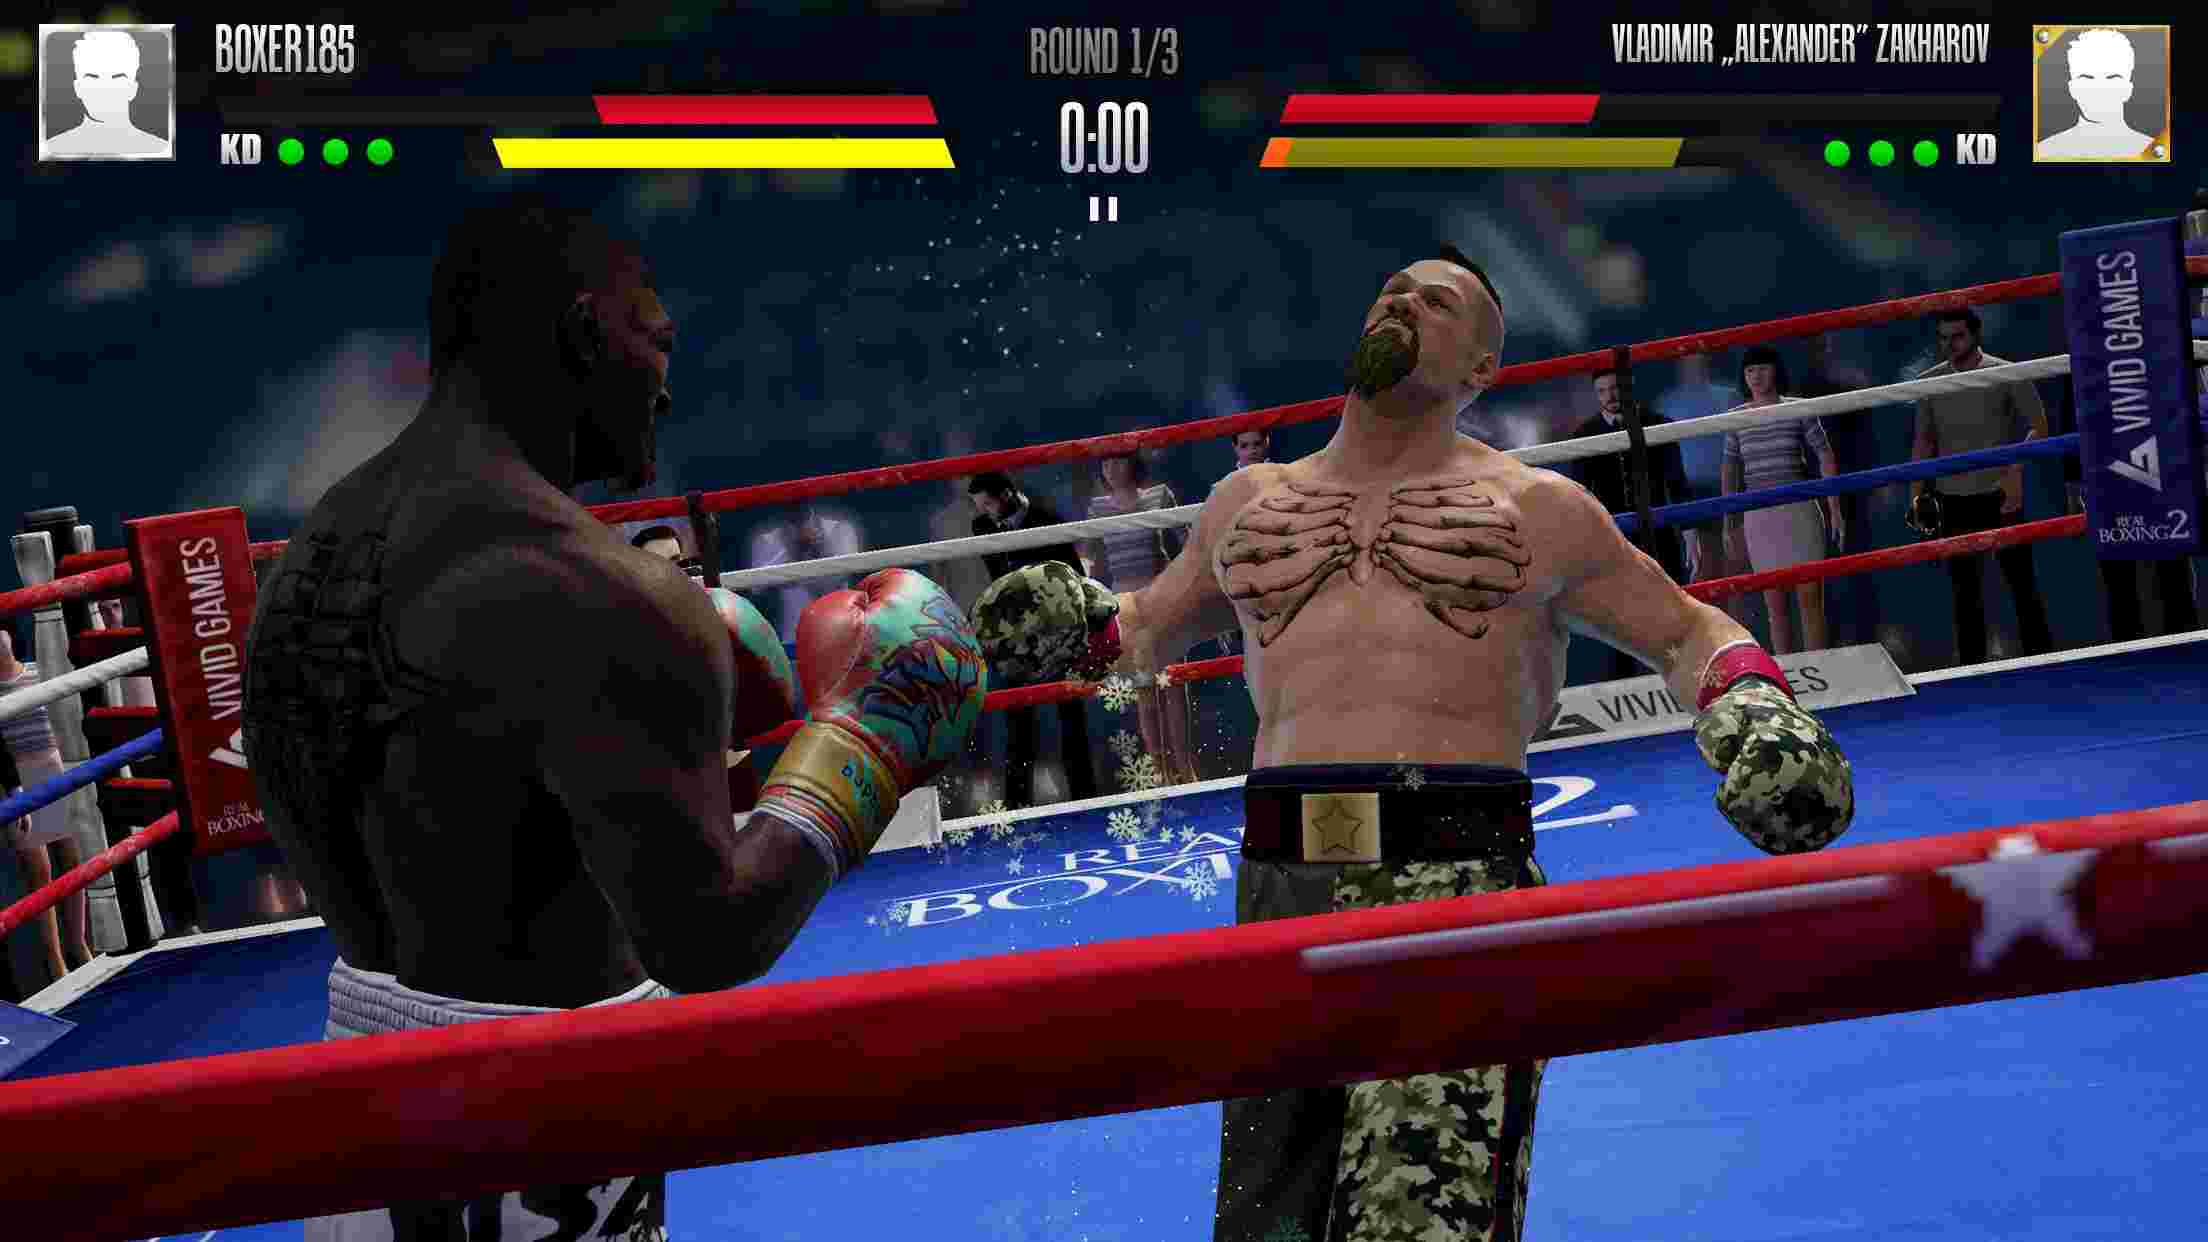 Real Boxing 2 Mod